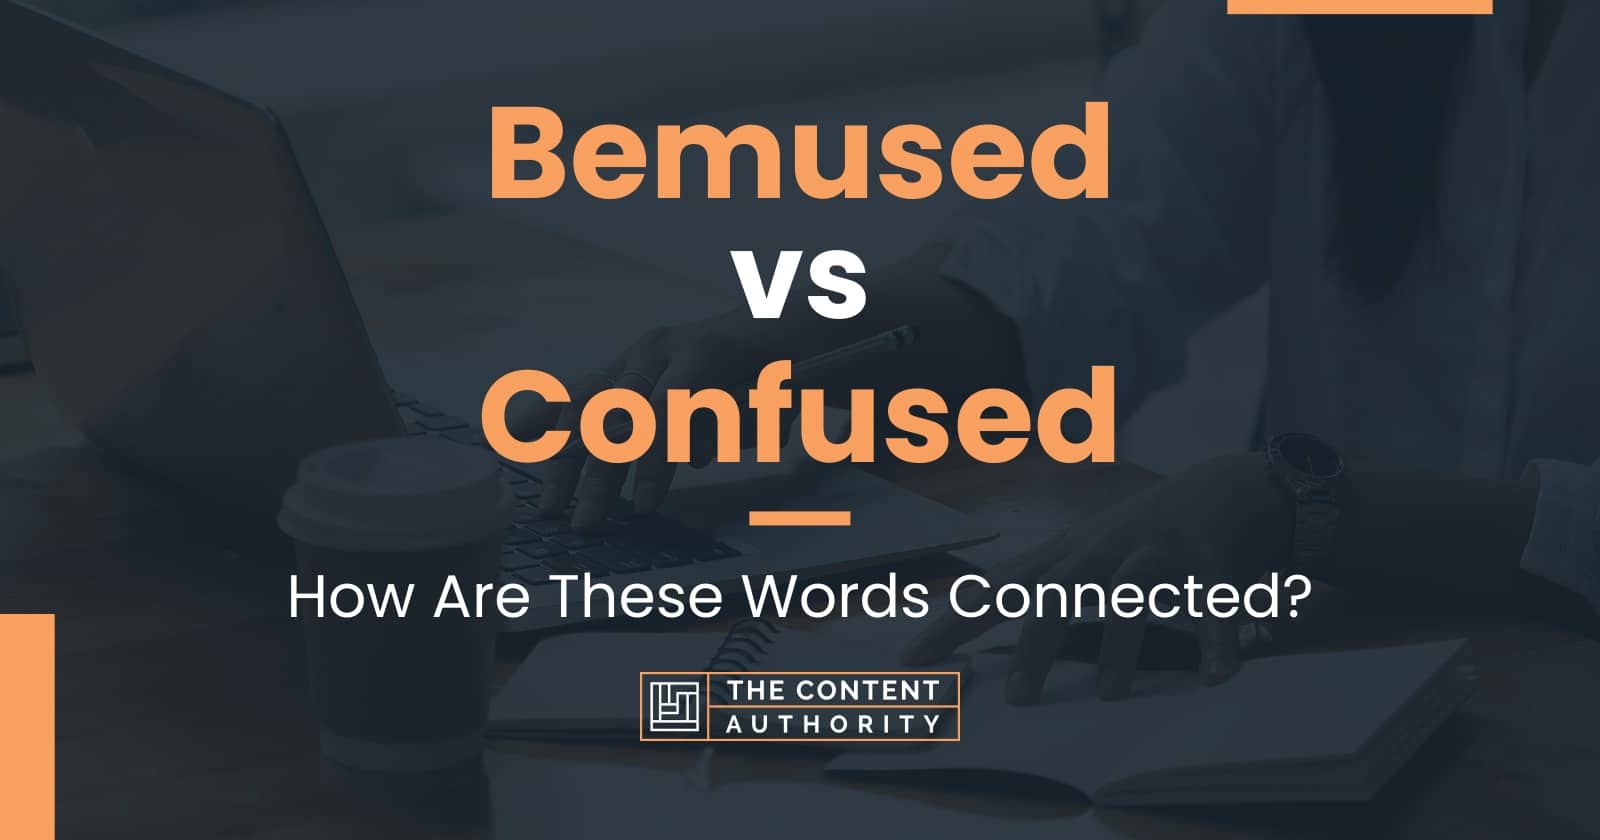 BEMUSED Definition & Usage Examples